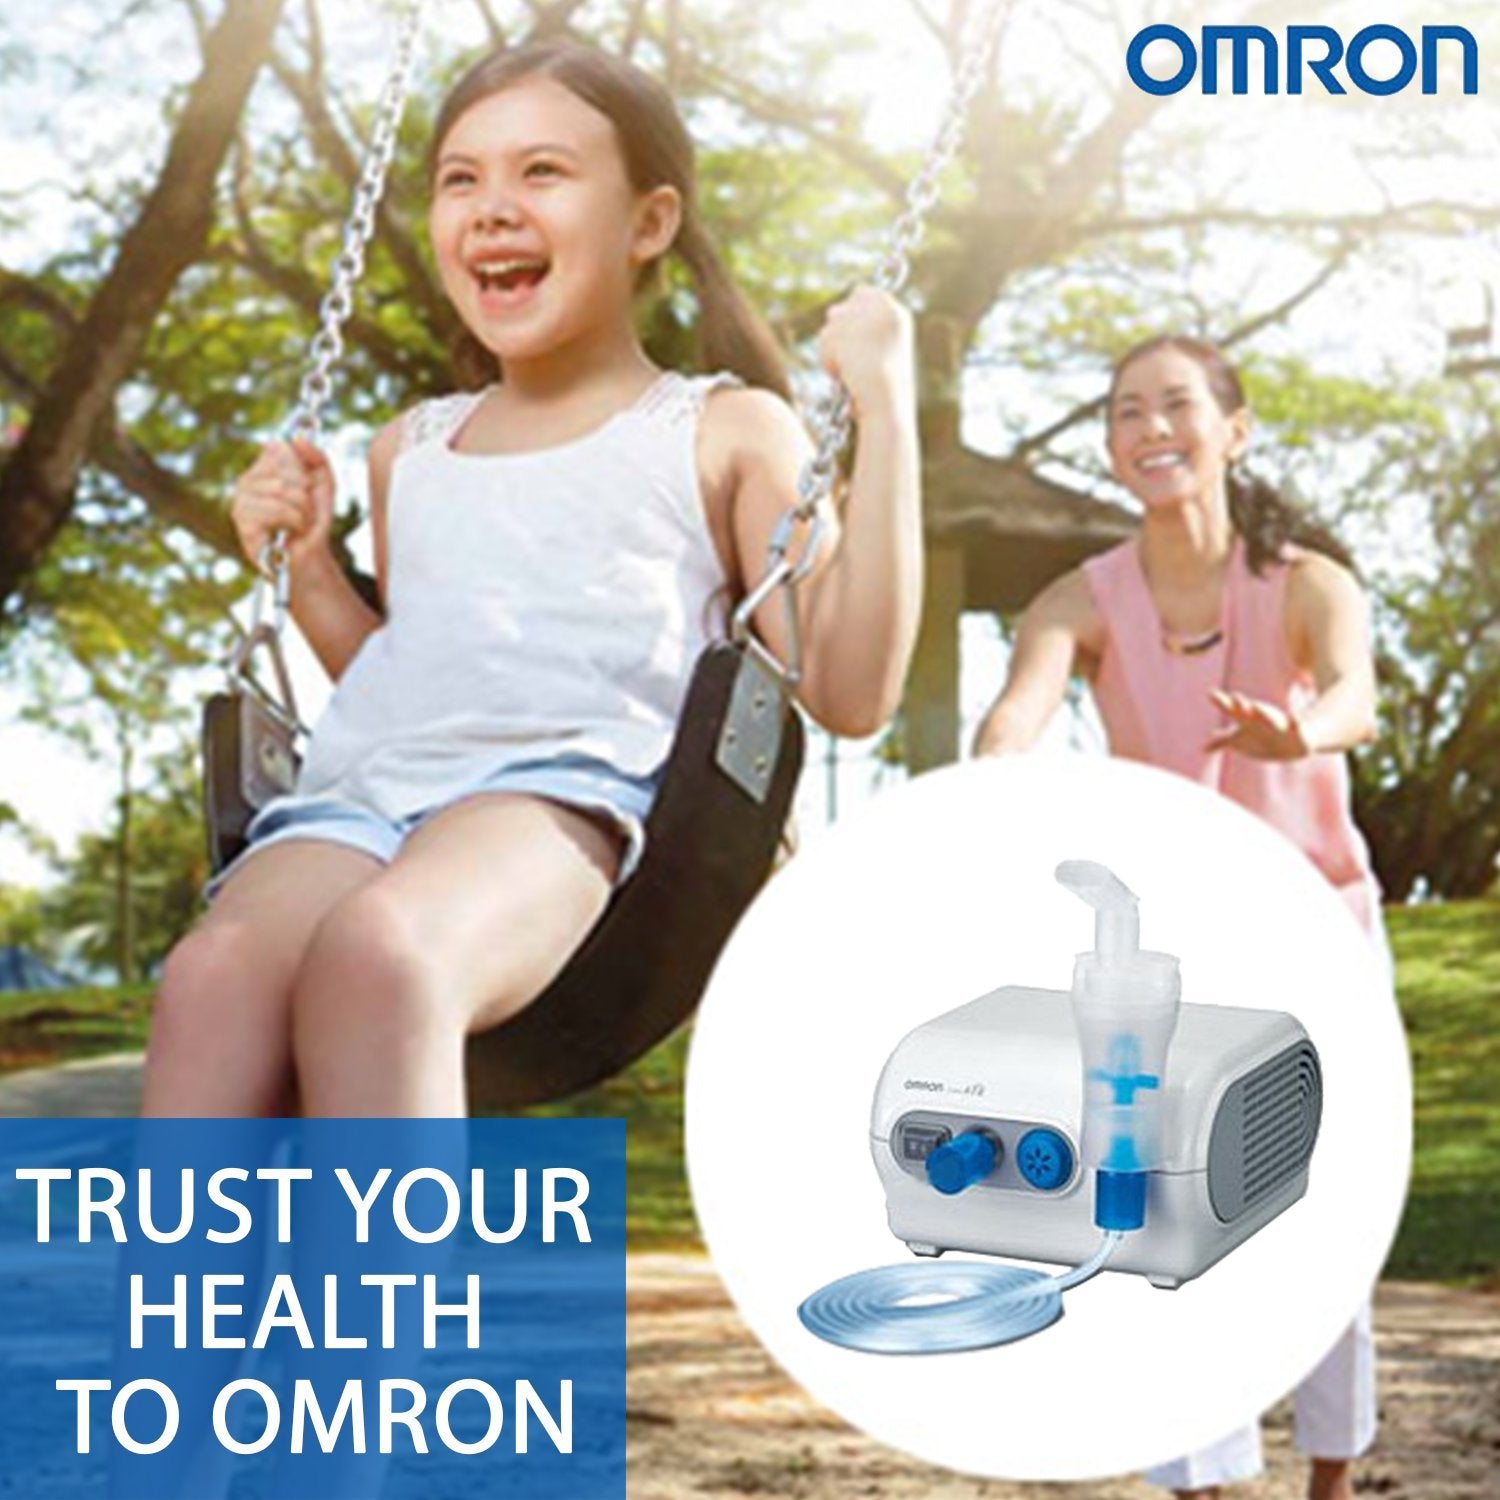 Omron NE C28 Compressor Nebulizer For Child and Adult With Virtual Valve Technology Ensuring Optimum Medicine Delivery to the Raspiratory System